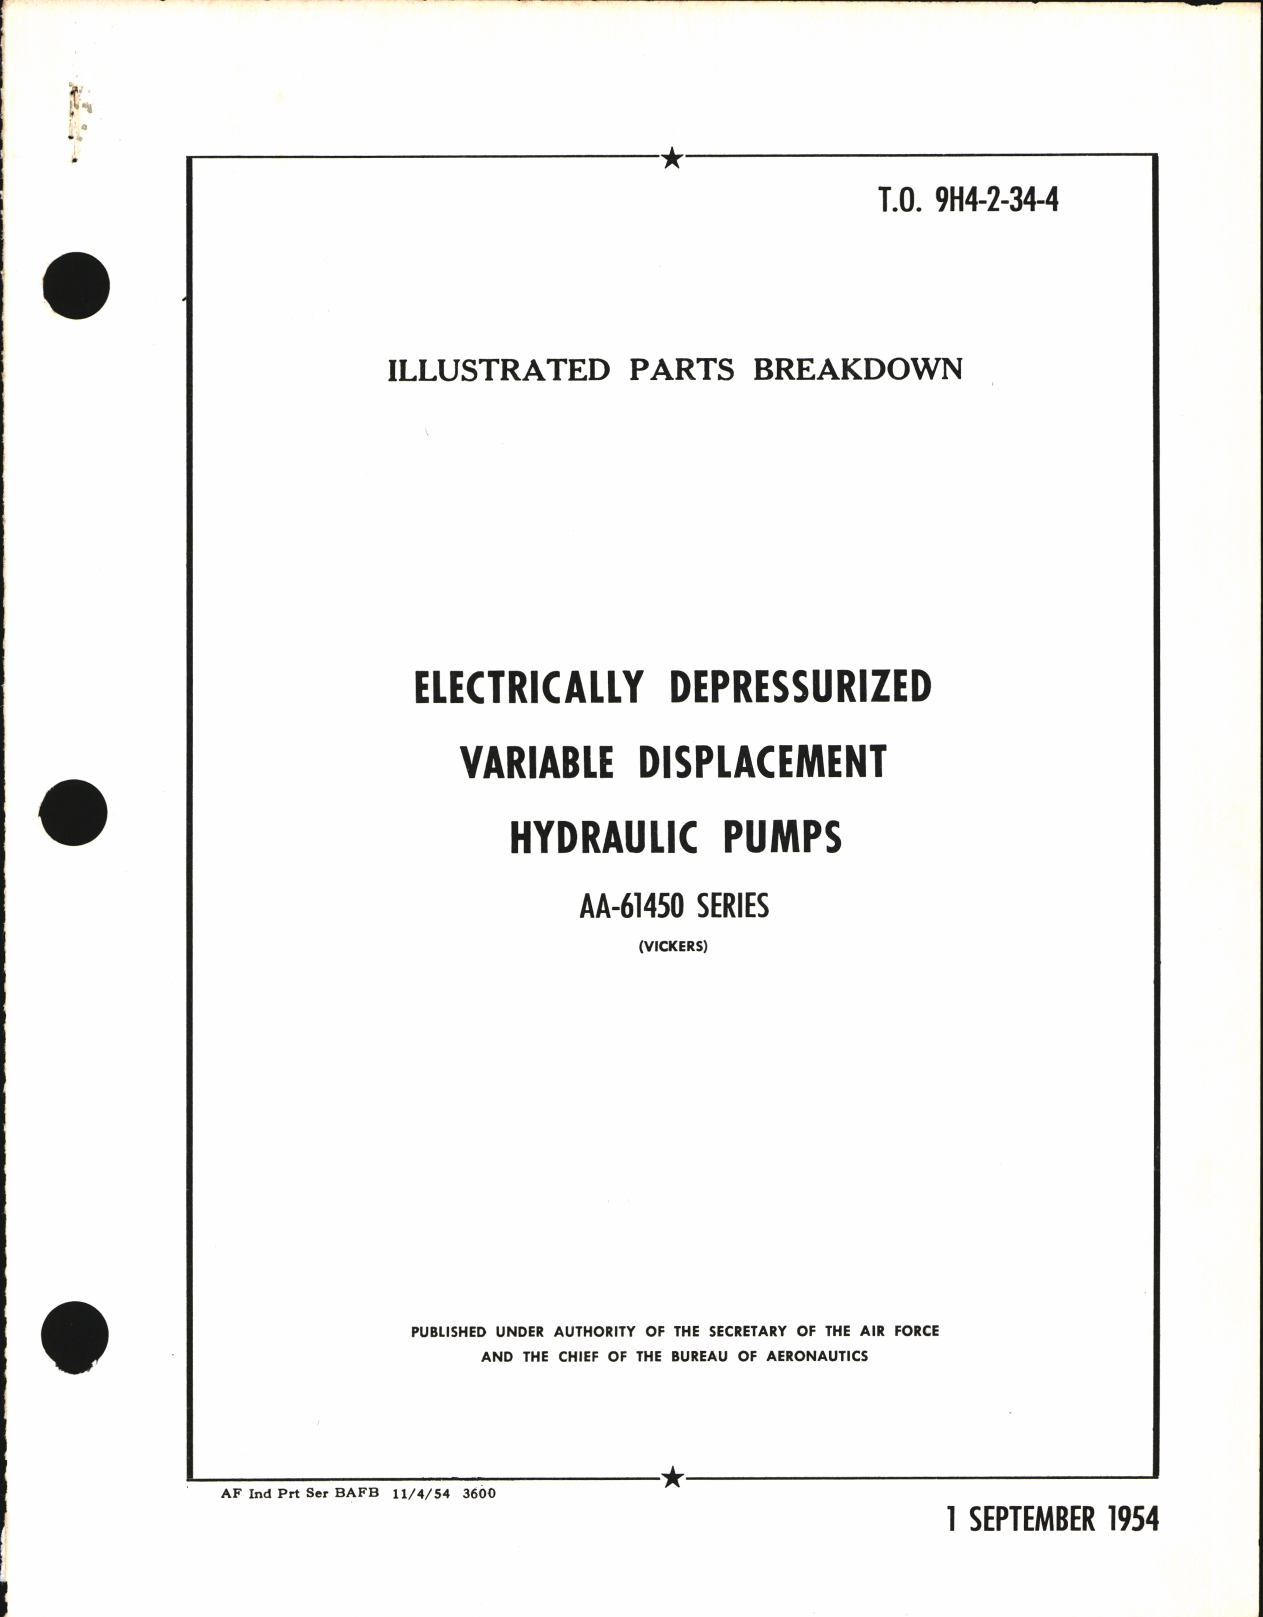 Sample page 1 from AirCorps Library document: Illustrated Parts Breakdown for Electrically Depressurized Variable Displacement Hydraulic Pumps AA-61450 Series